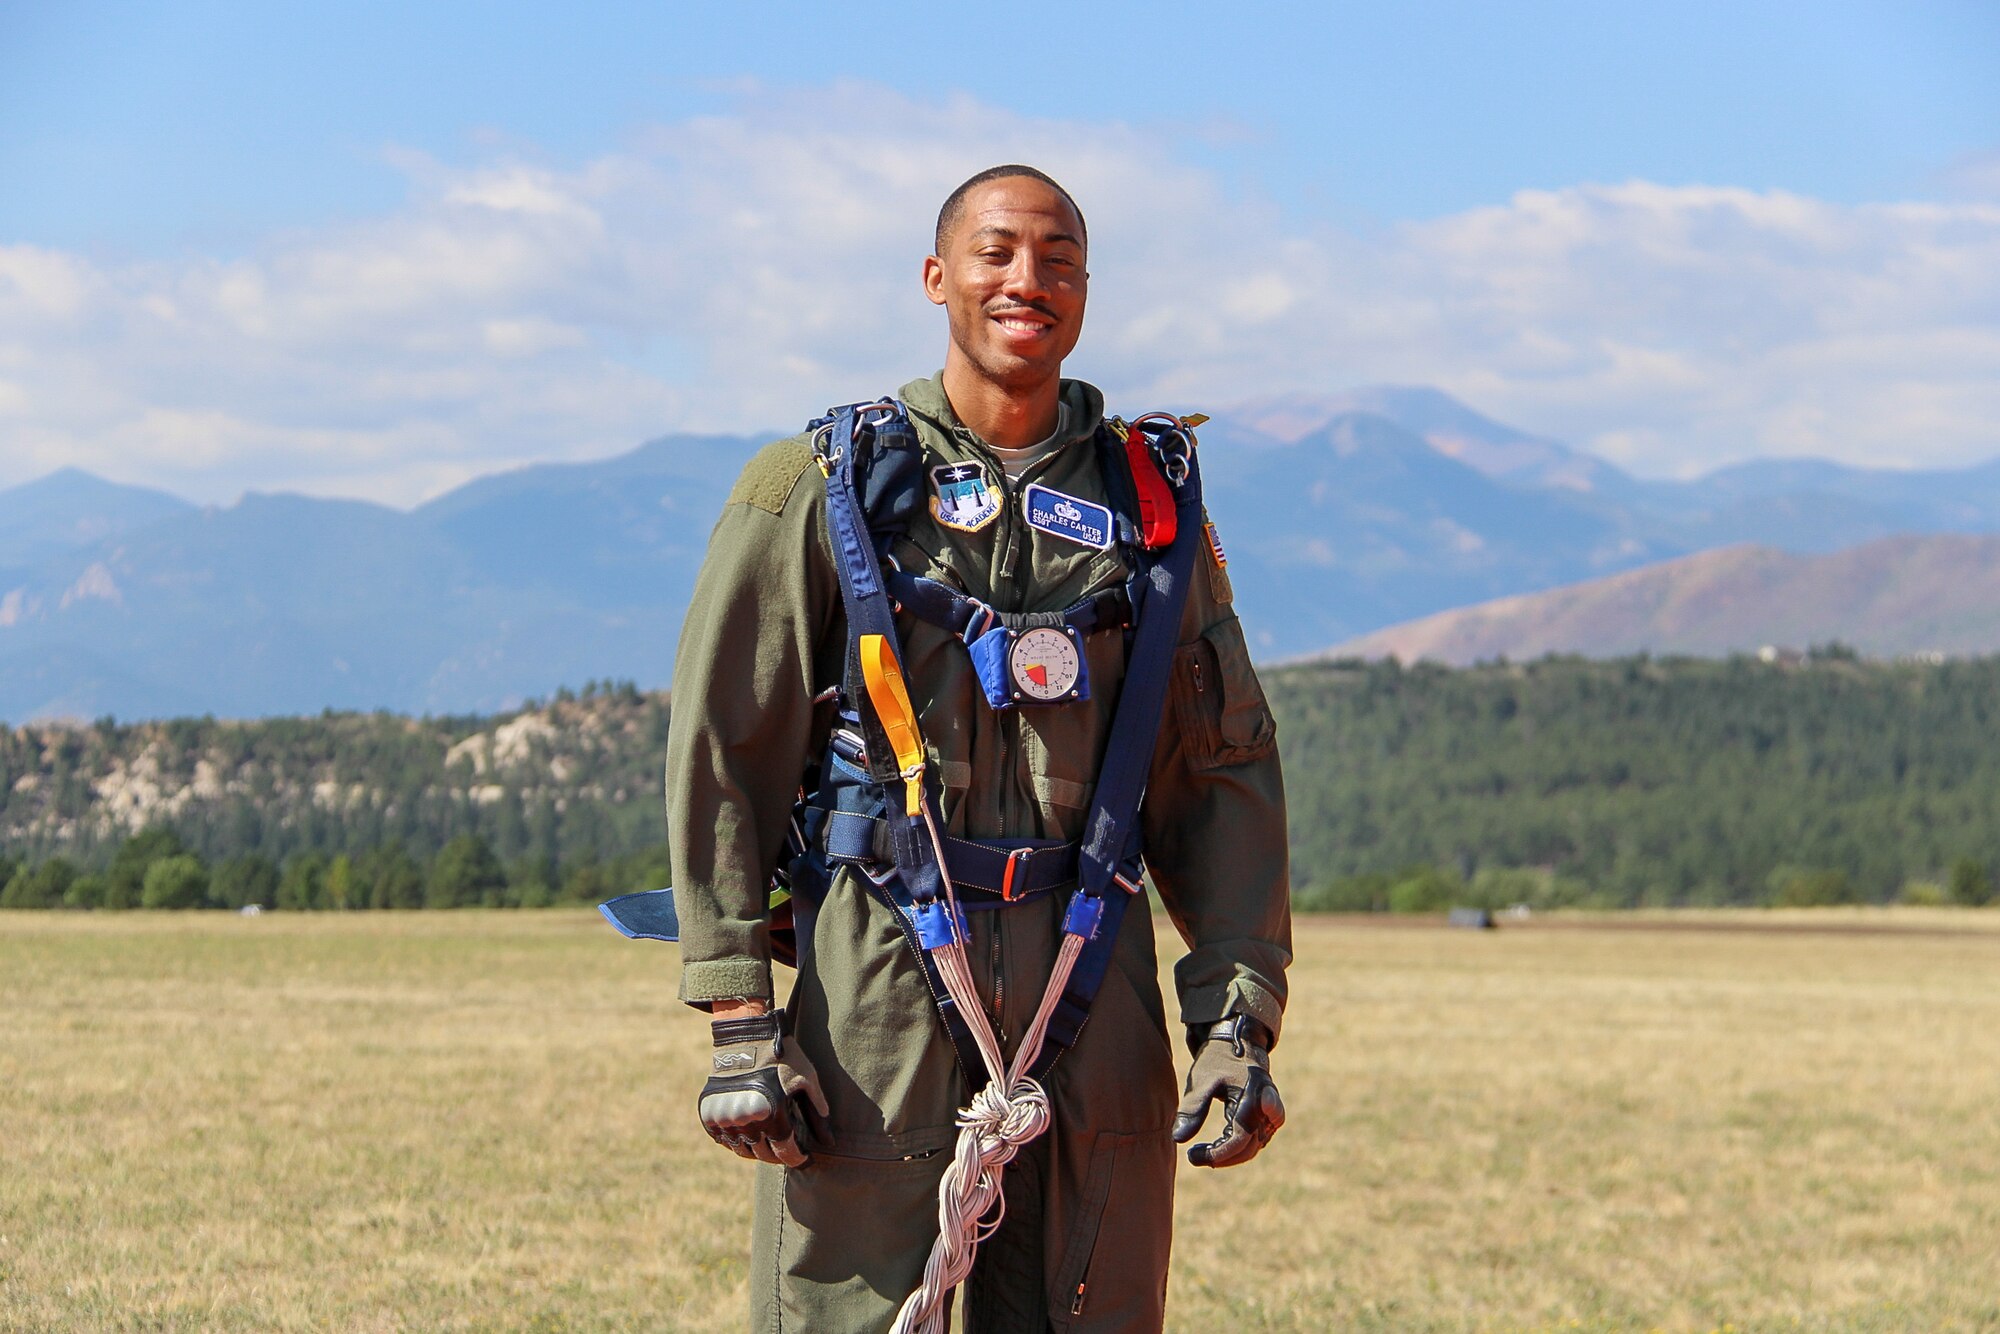 Staff Sgt. Charles Carter poses for a photo after successfully completing one of his five solo parachute jumps as part of the Air Force Academy's Airmanship 490 course. (Courtesy photo)